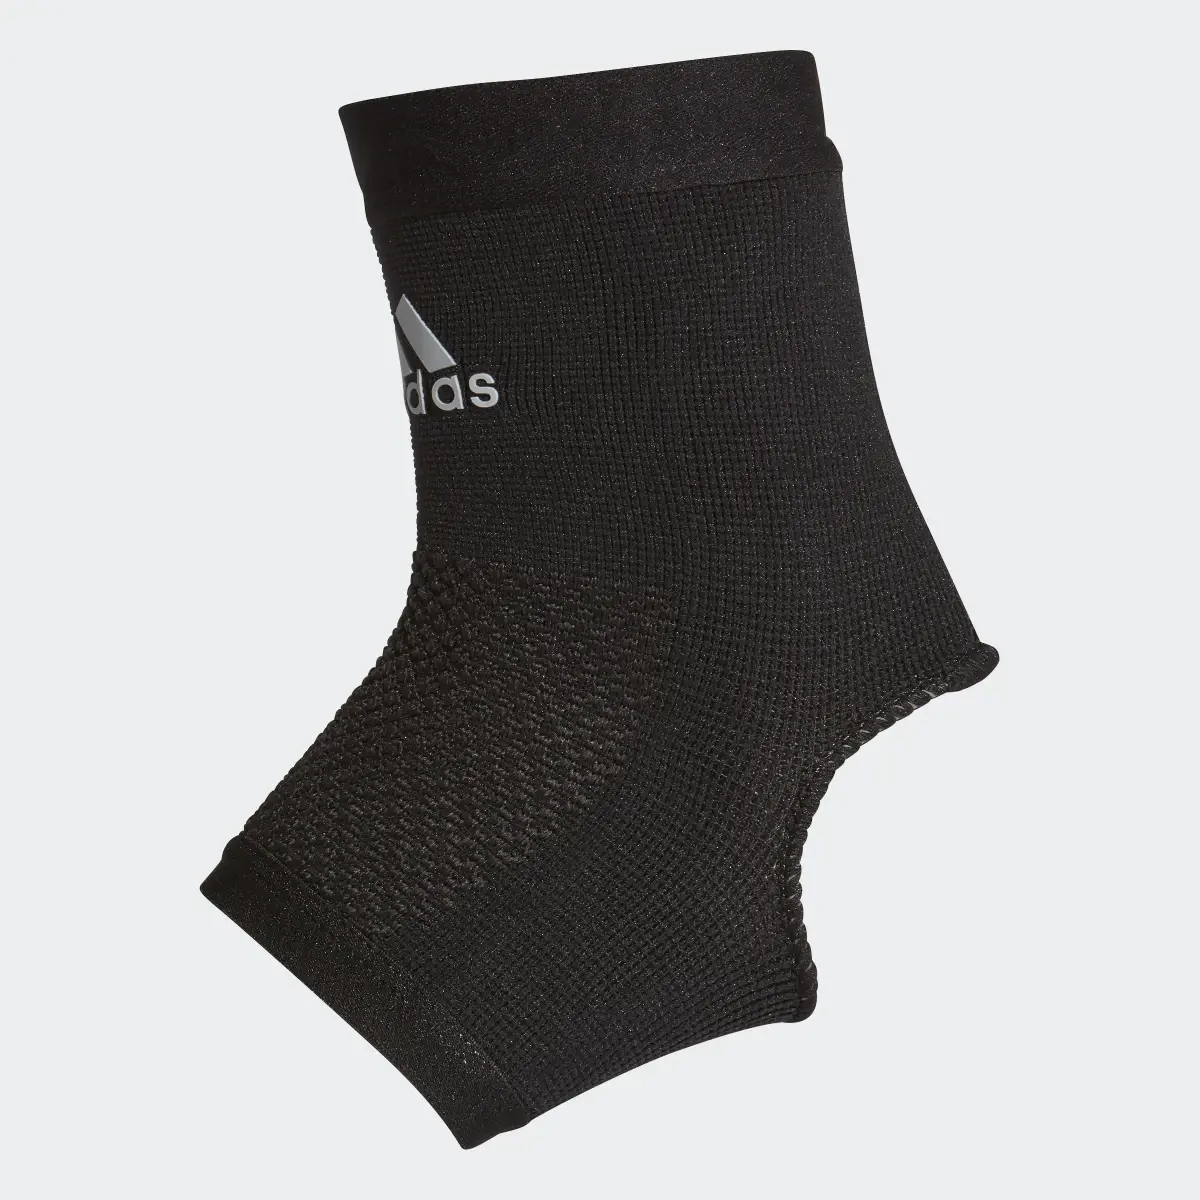 Adidas Performance Ankle Support. 2